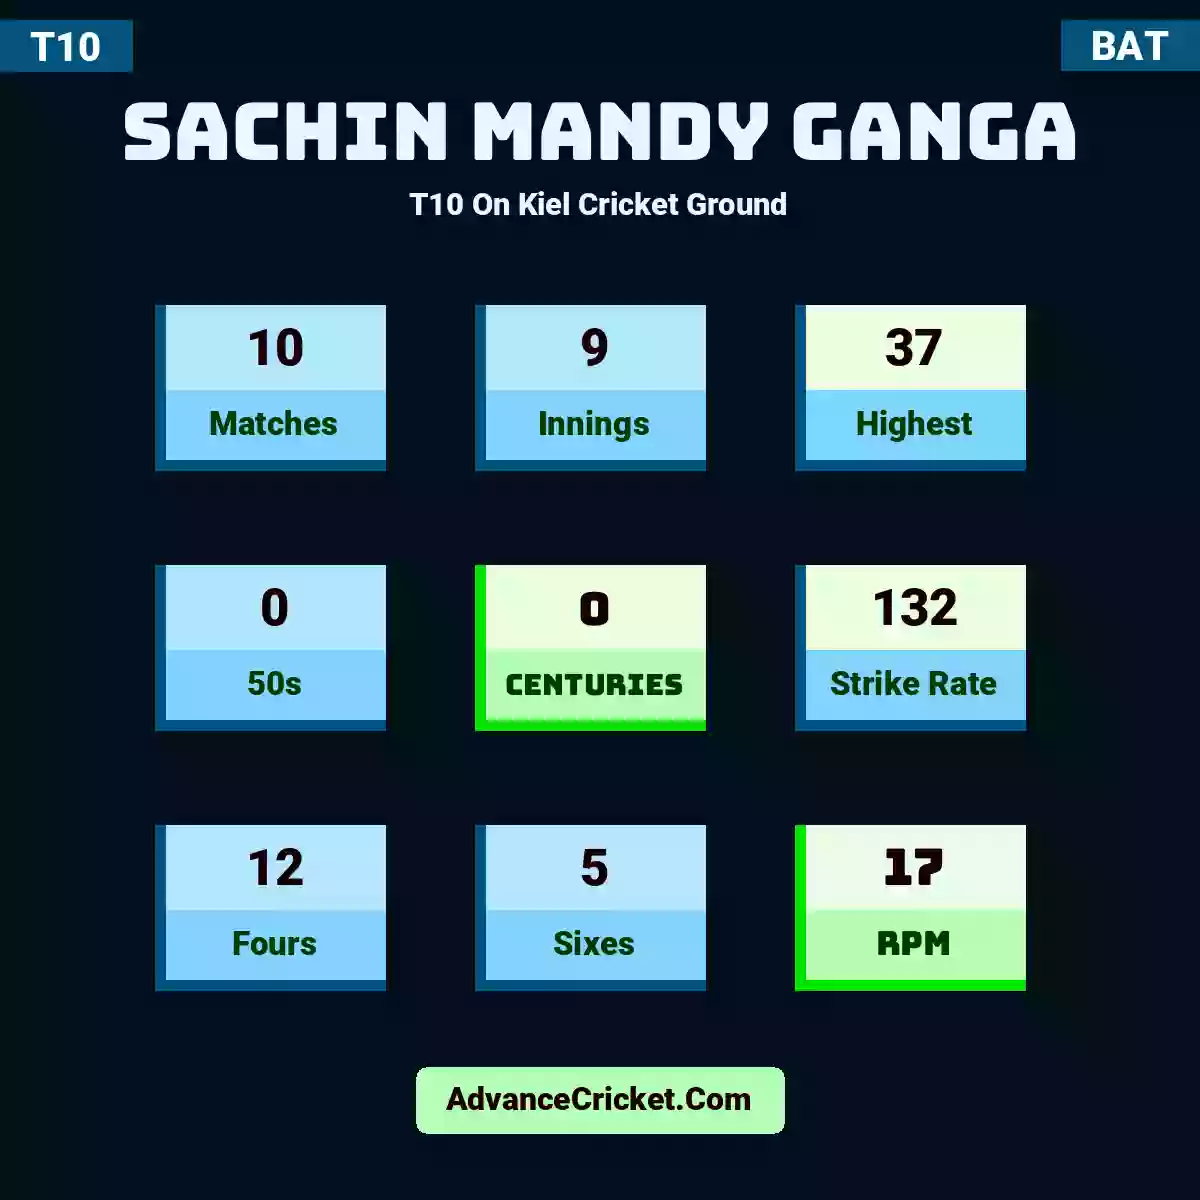 Sachin Mandy Ganga T10  On Kiel Cricket Ground, Sachin Mandy Ganga played 10 matches, scored 37 runs as highest, 0 half-centuries, and 0 centuries, with a strike rate of 132. S.Mandy Ganga hit 12 fours and 5 sixes, with an RPM of 17.